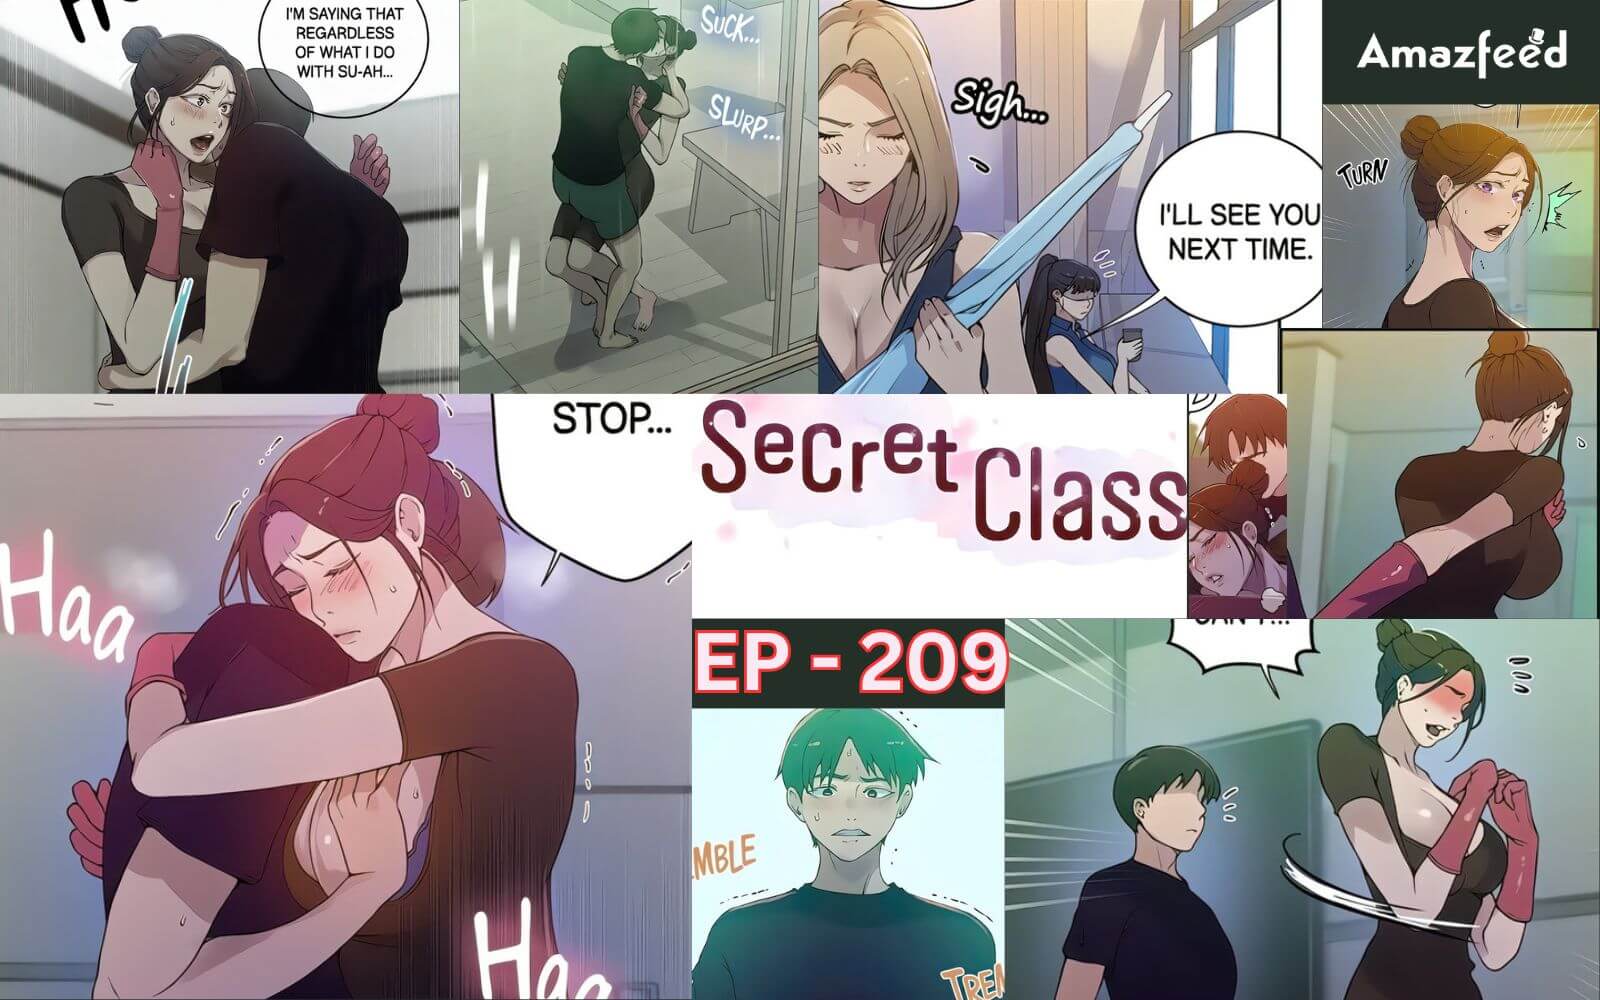 Secret Class Chapter 209 Official Spoiler Is Leaked